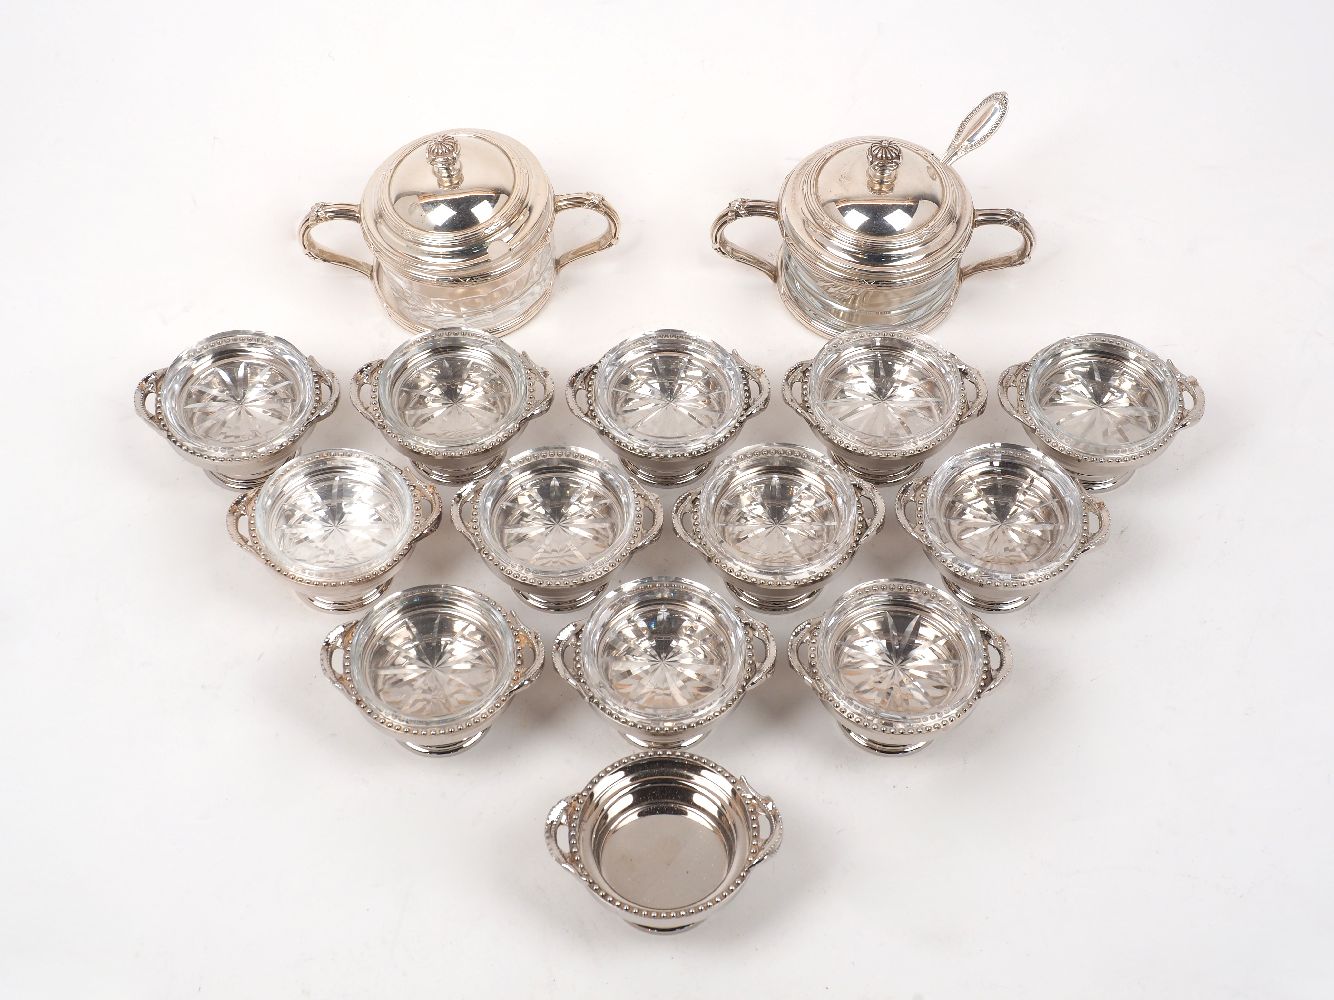 A matched pair of Buccellati silver mounted glass sugar/jam bowls, signed Gianmaria Buccellati,